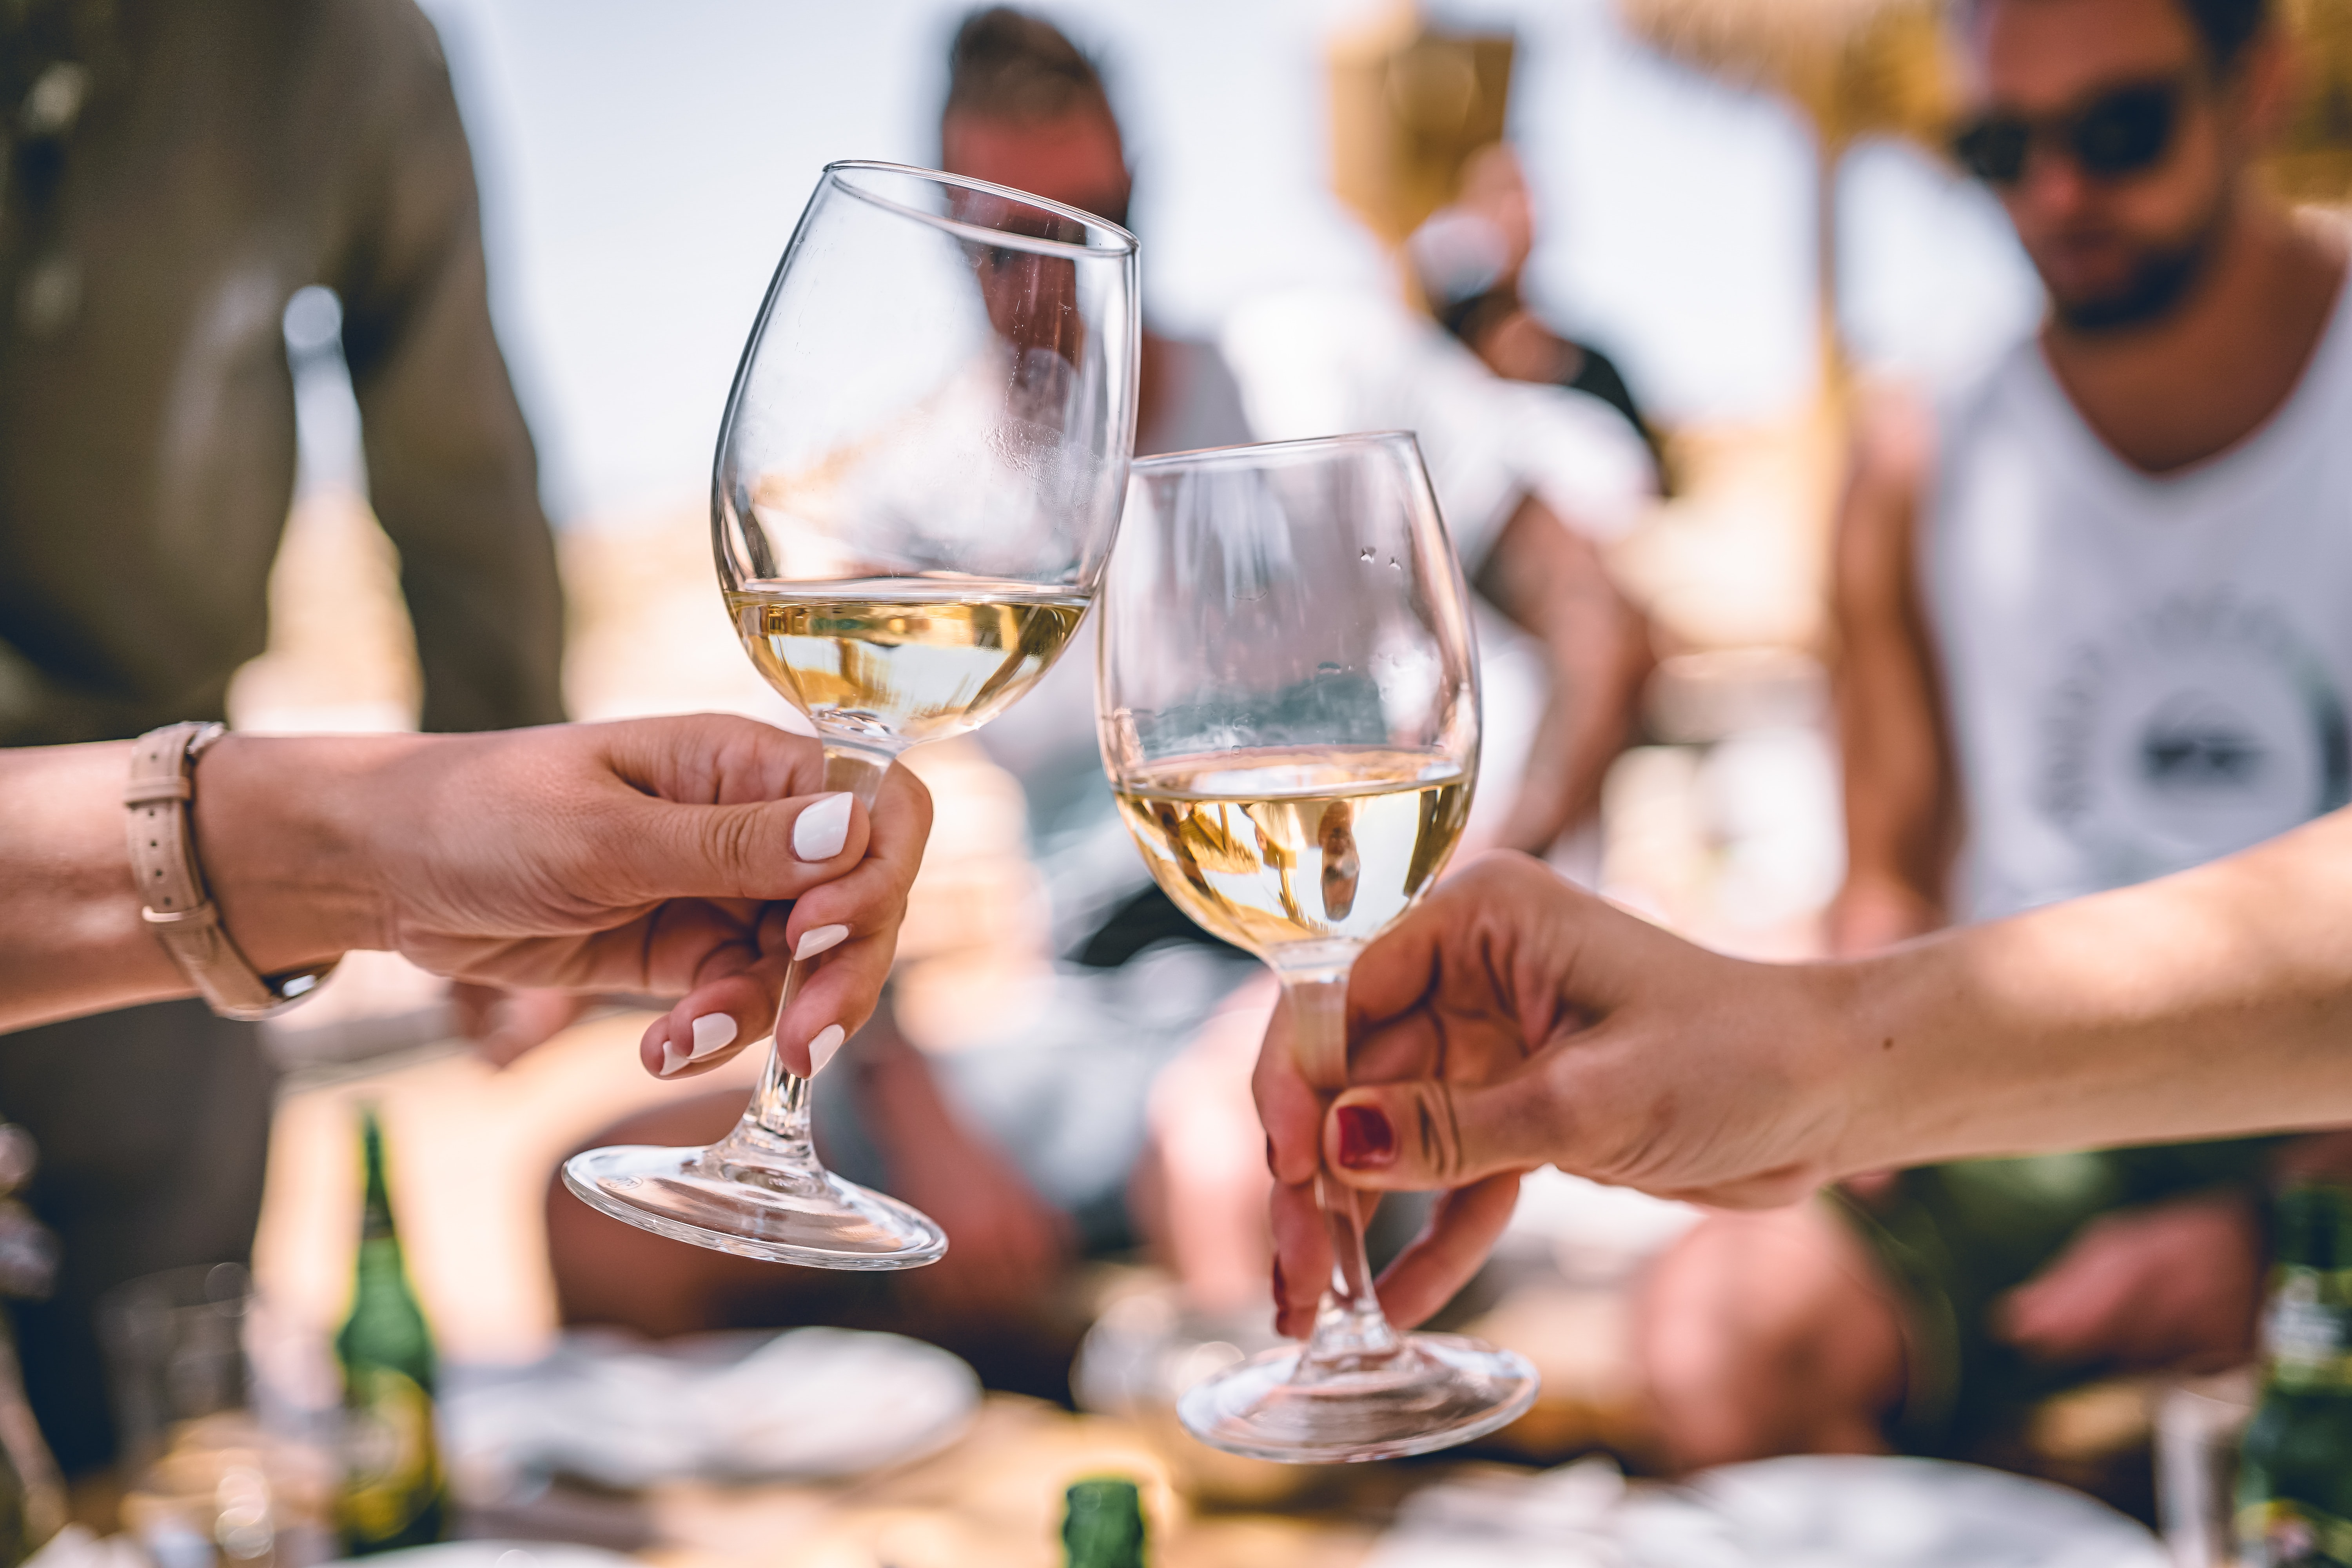 The ultimate wine festival is coming to Stellenbosch